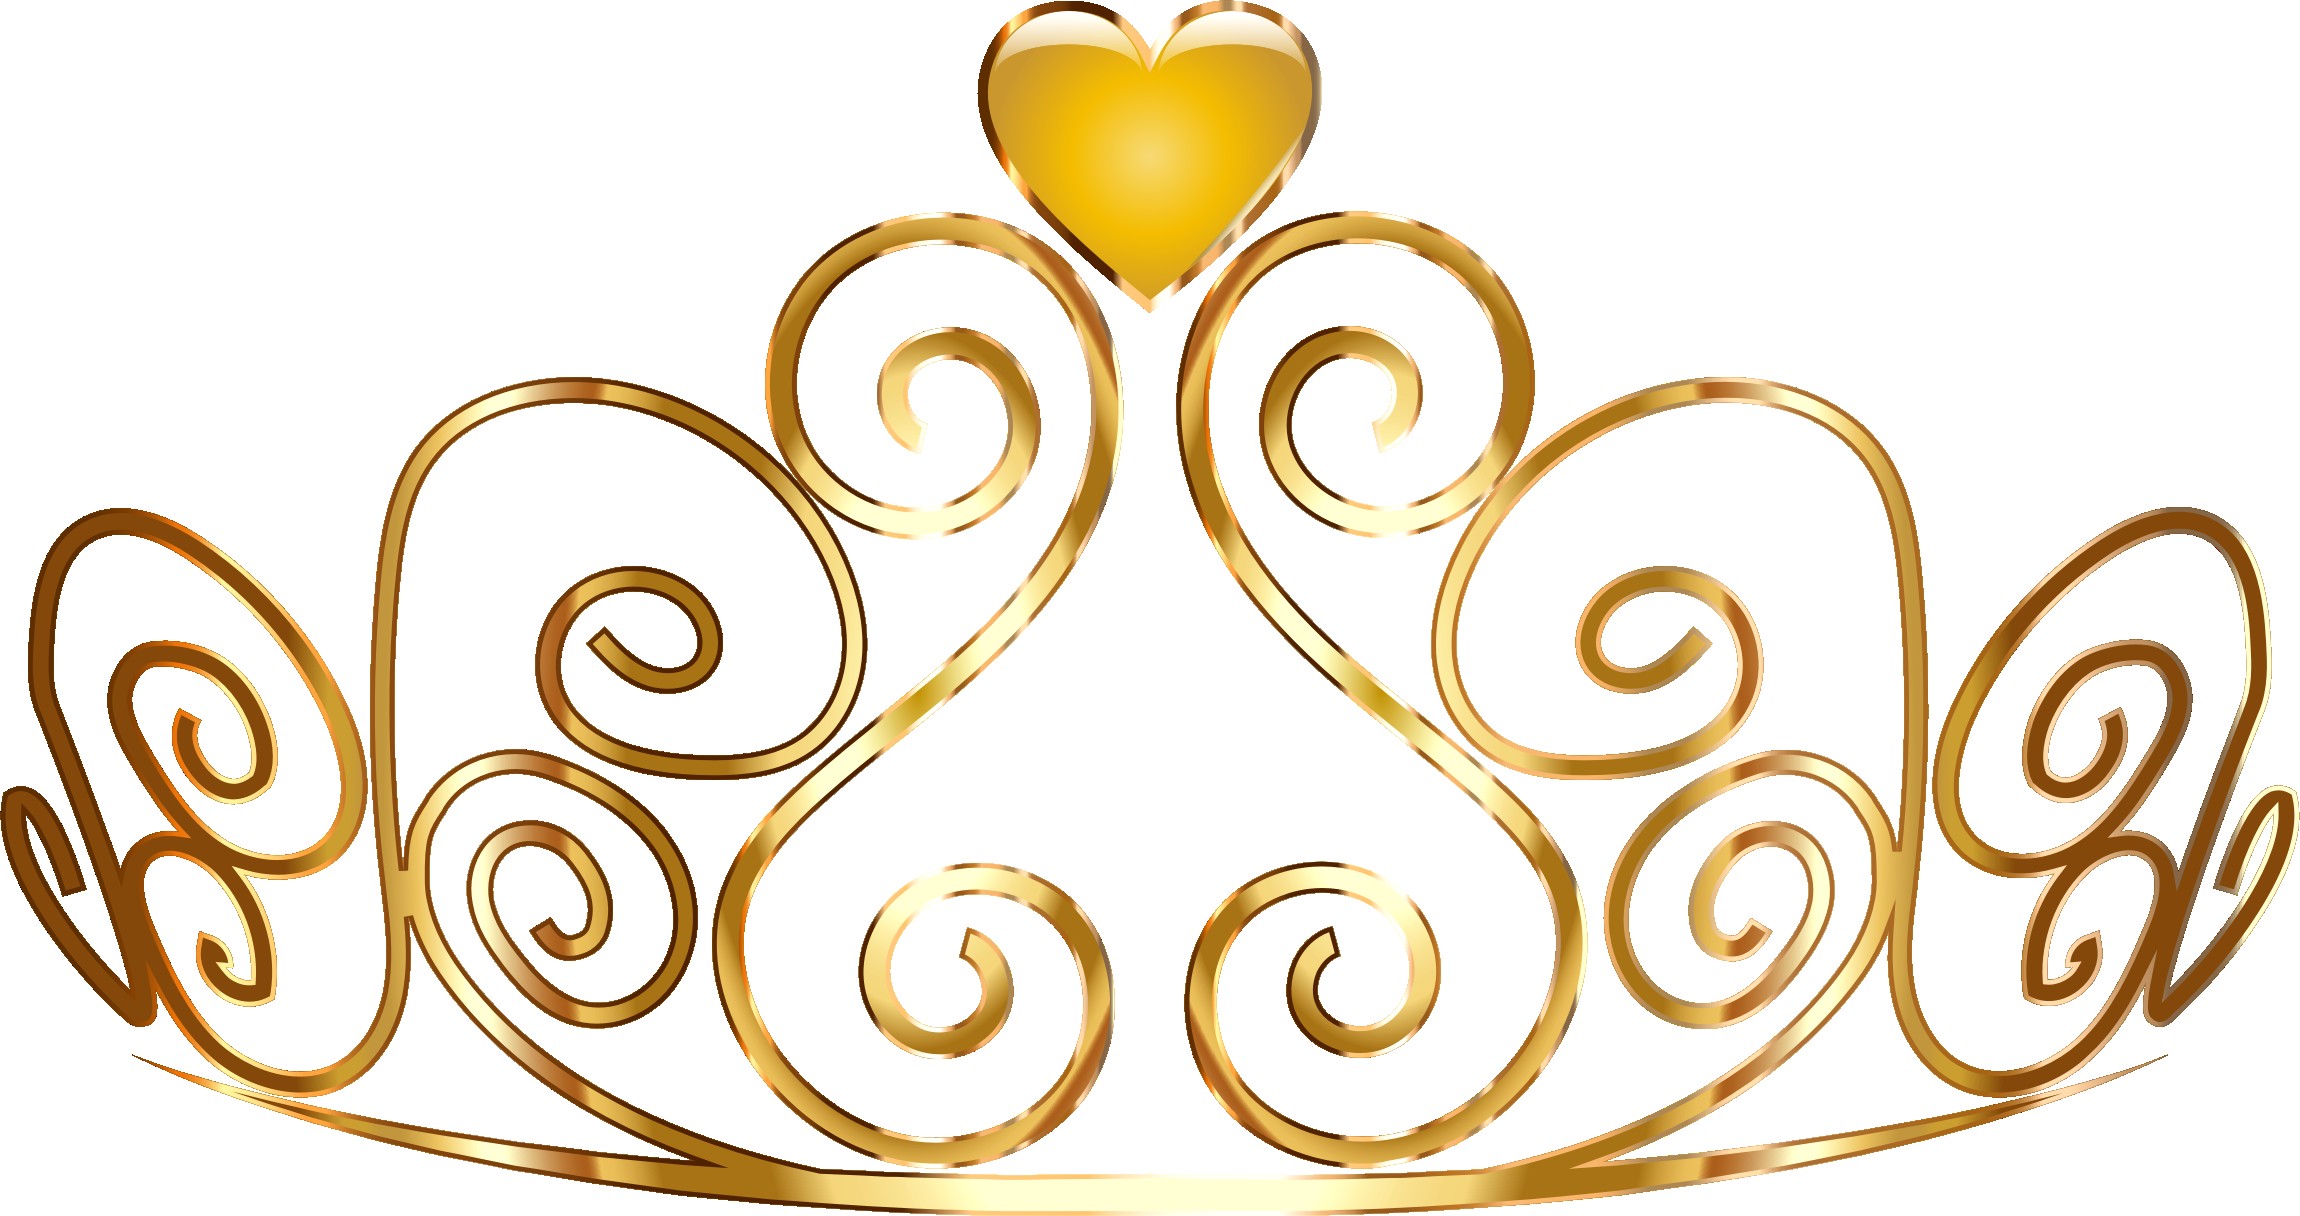 gold-clipart-princess-crown-pencil-and-in-color-png-2300-1216